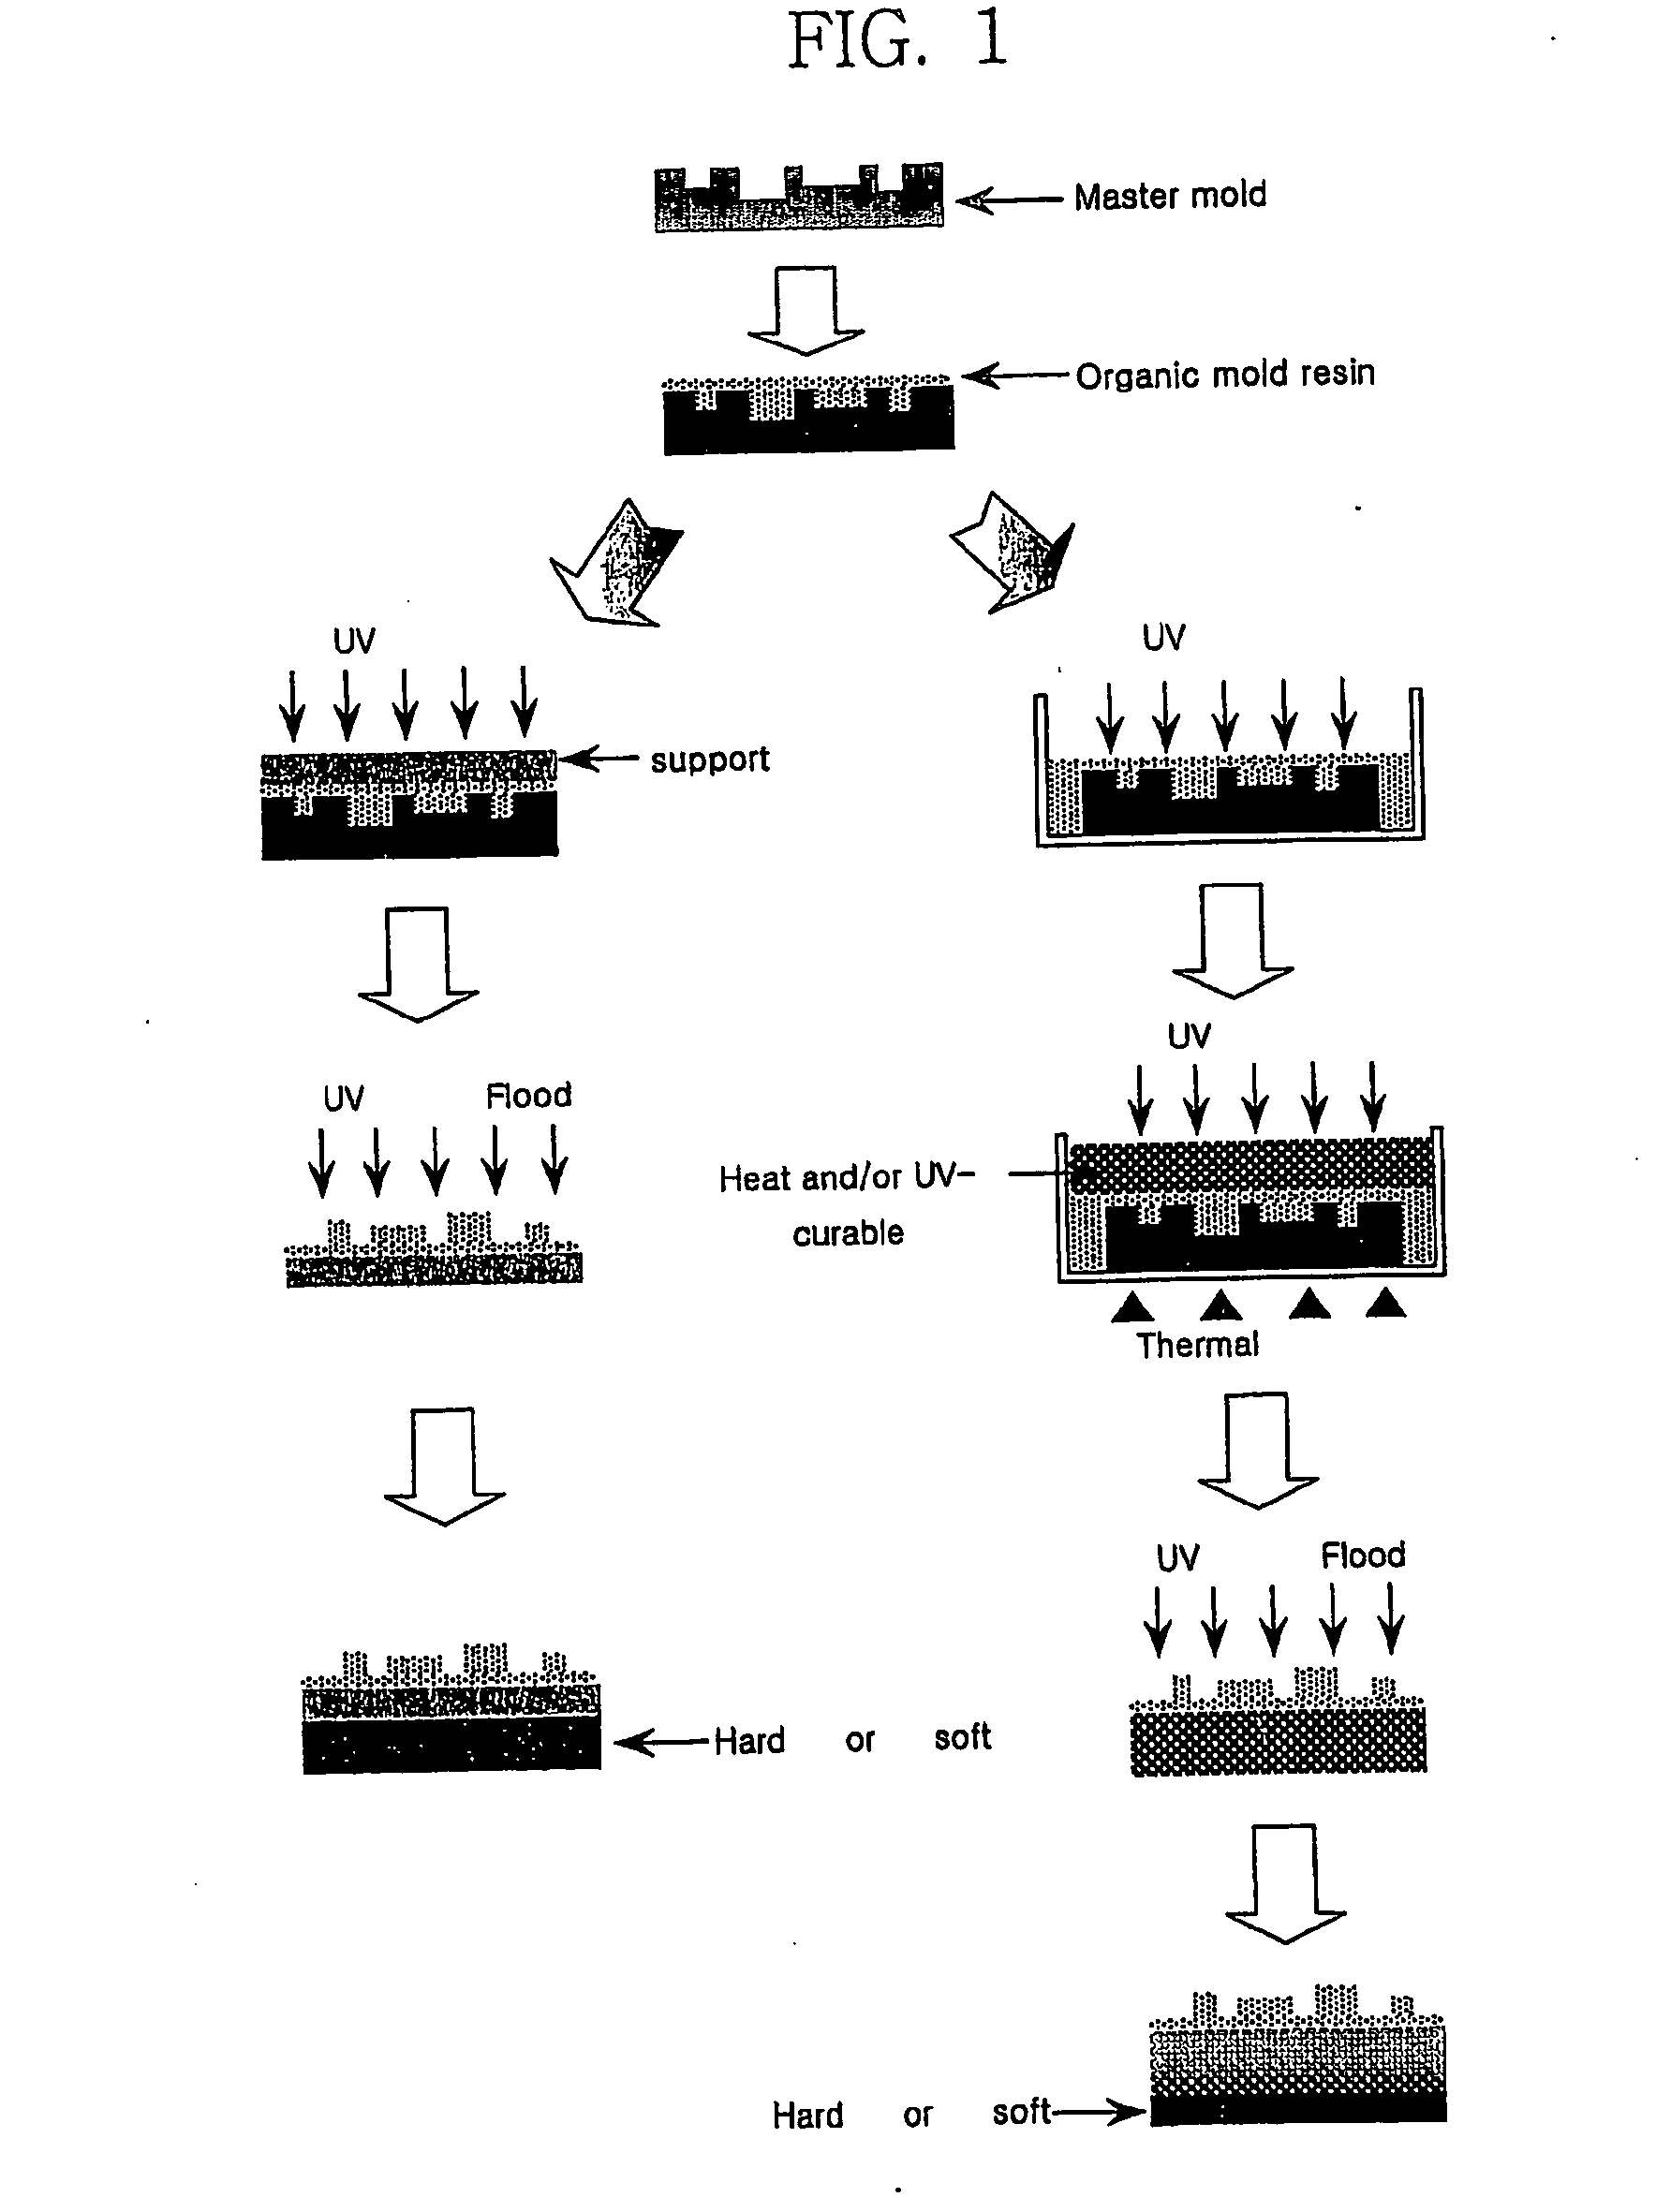 Resin composition for mold used in forming micropattern, and method for fabricating organic mold therefrom